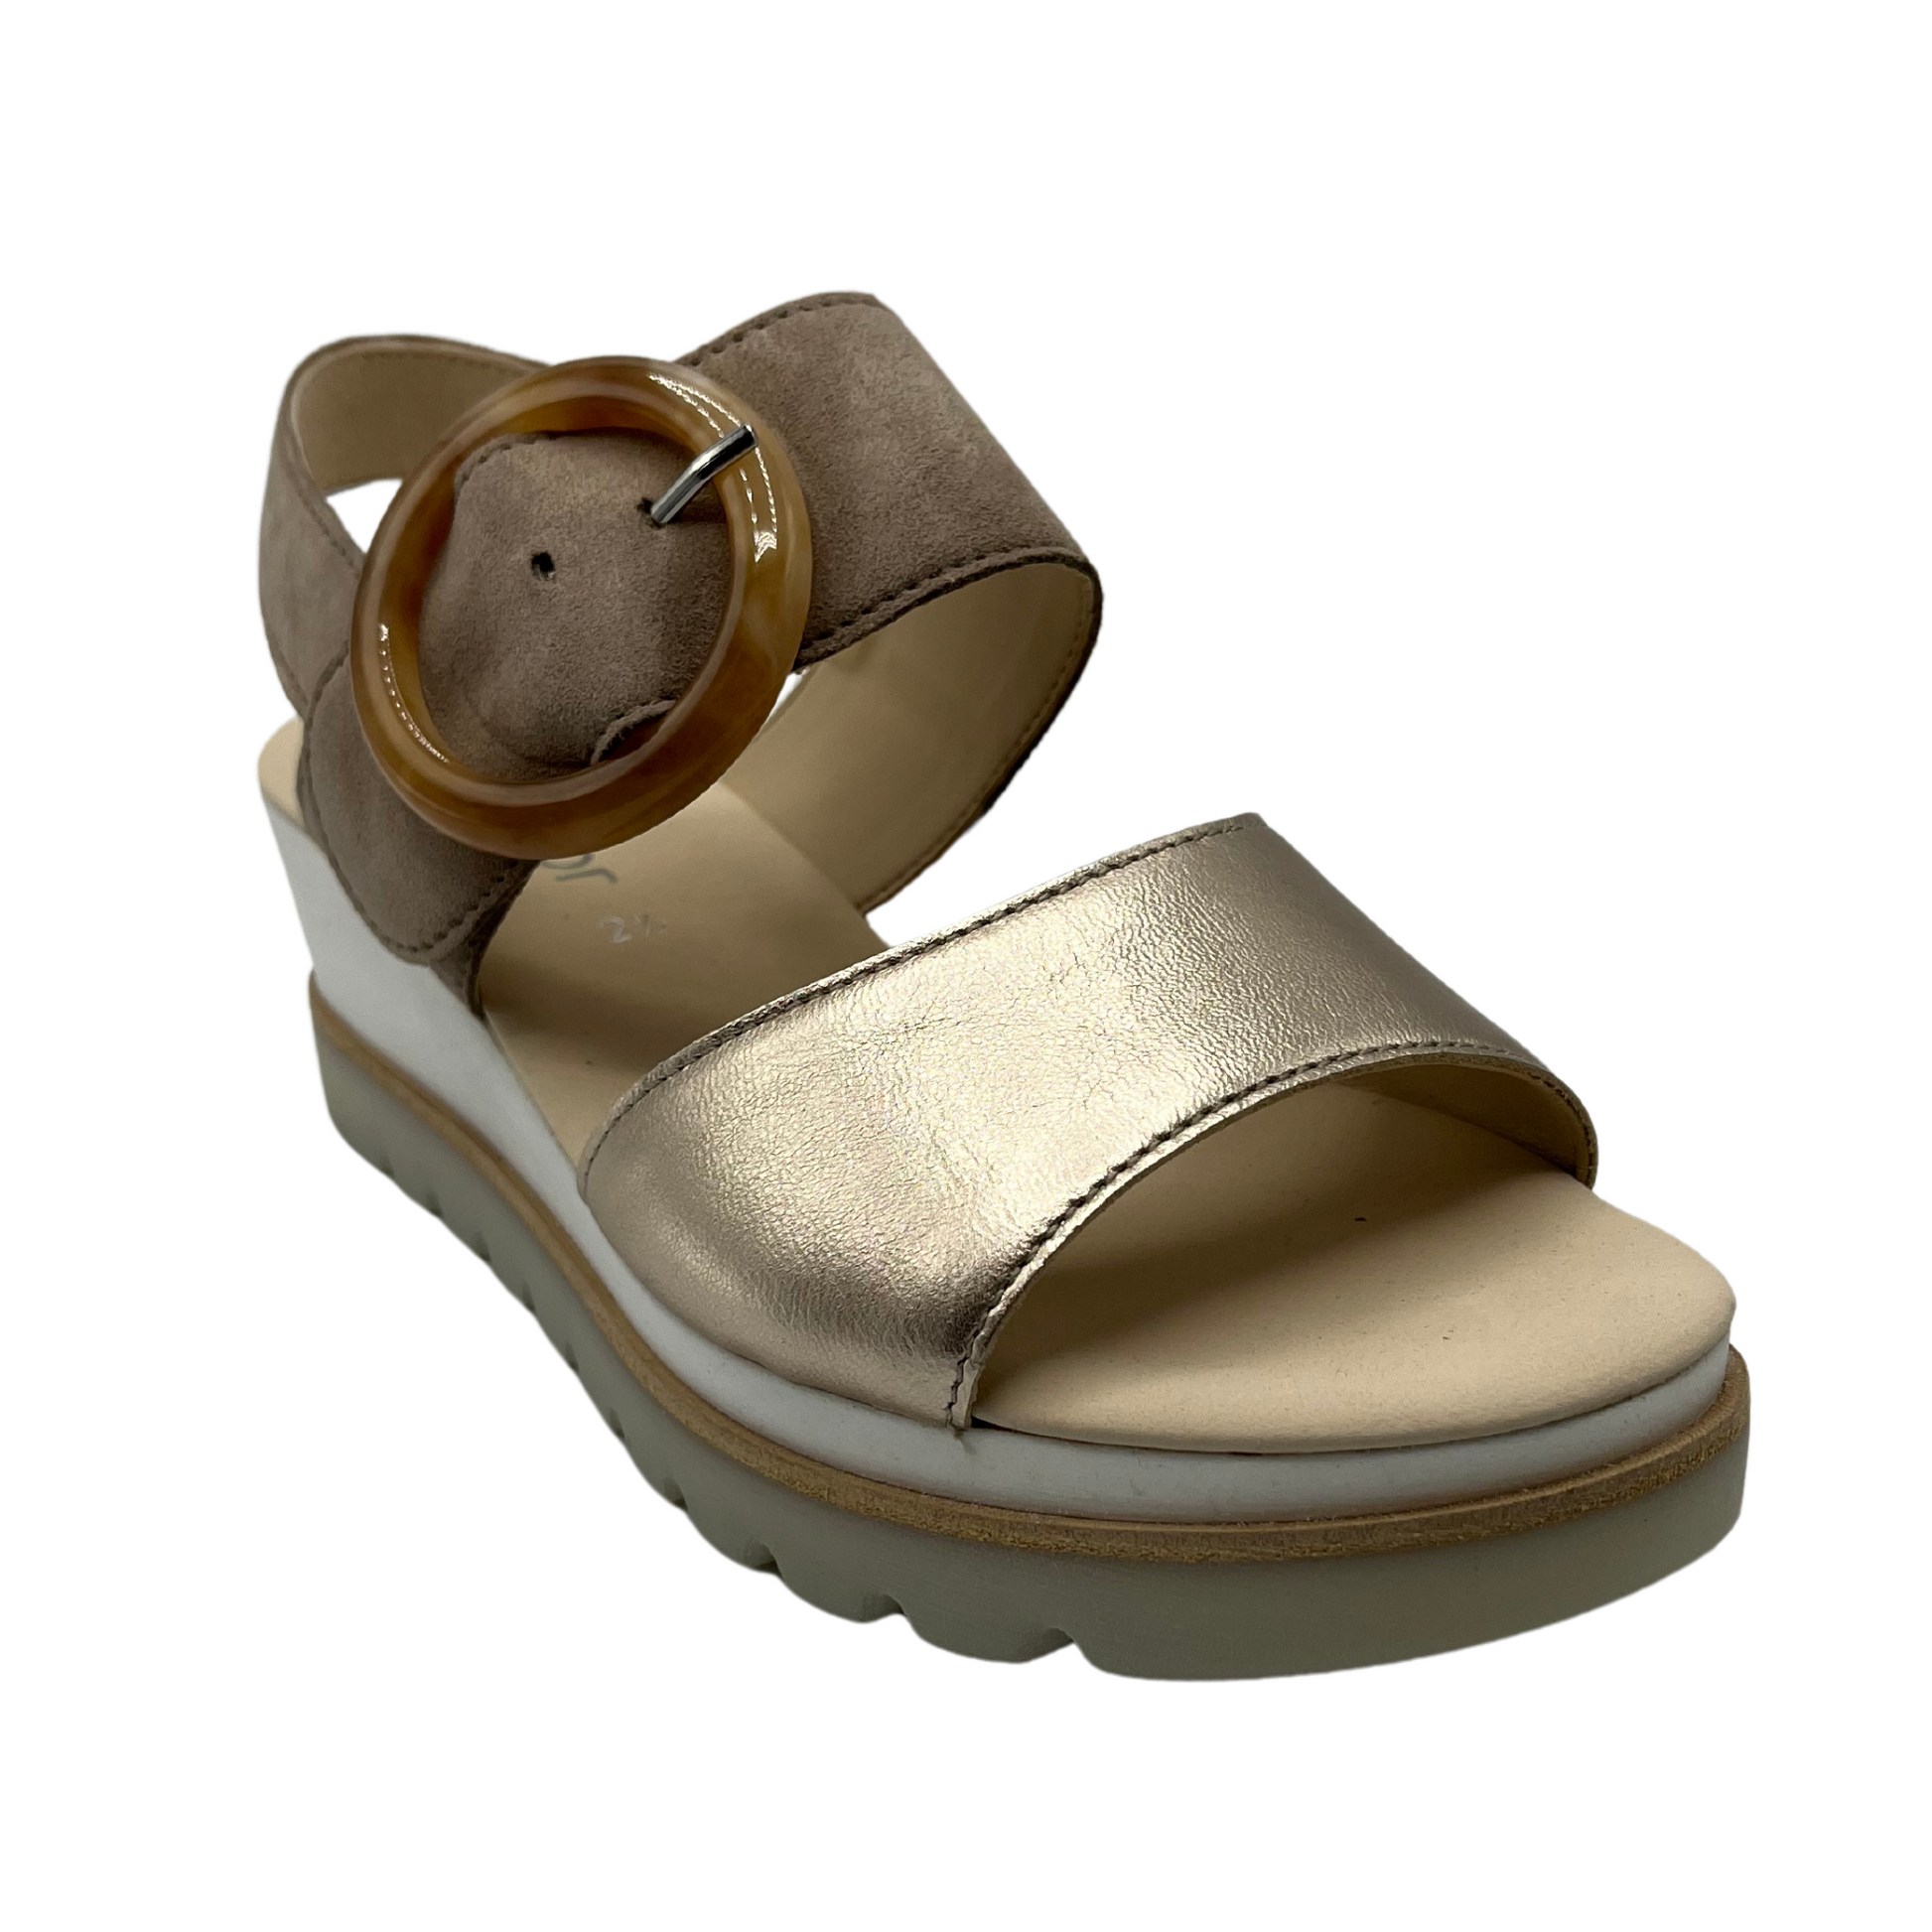 45 degree angled view of taupe and gold sandal with open toe and round buckle on top strap